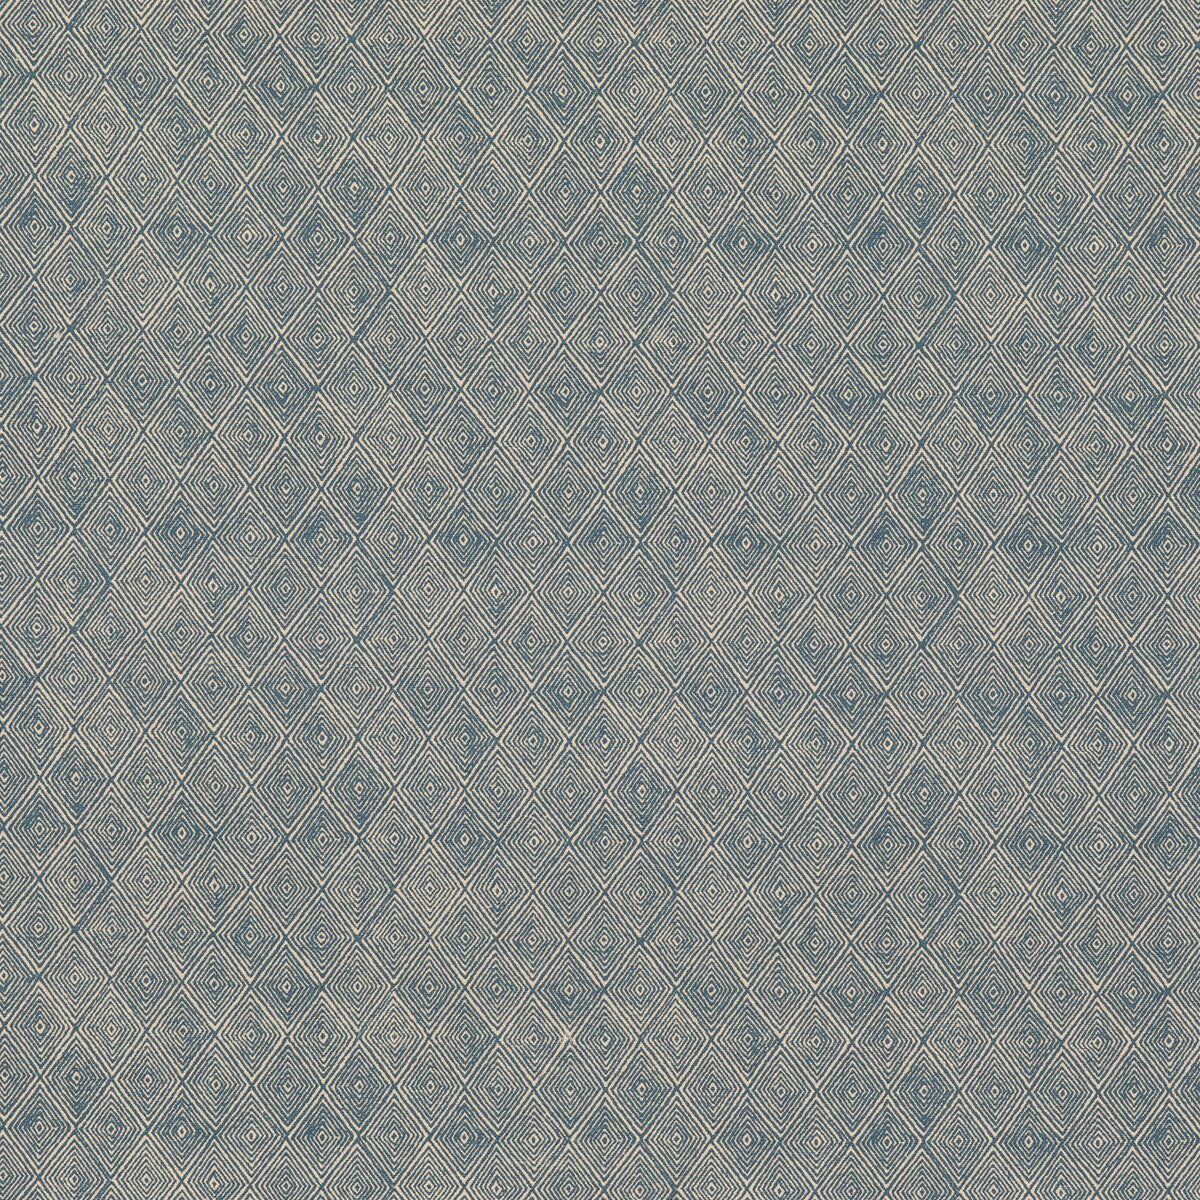 Boundary fabric in indigo color - pattern ED75042.4.0 - by Threads in the Nala Prints collection